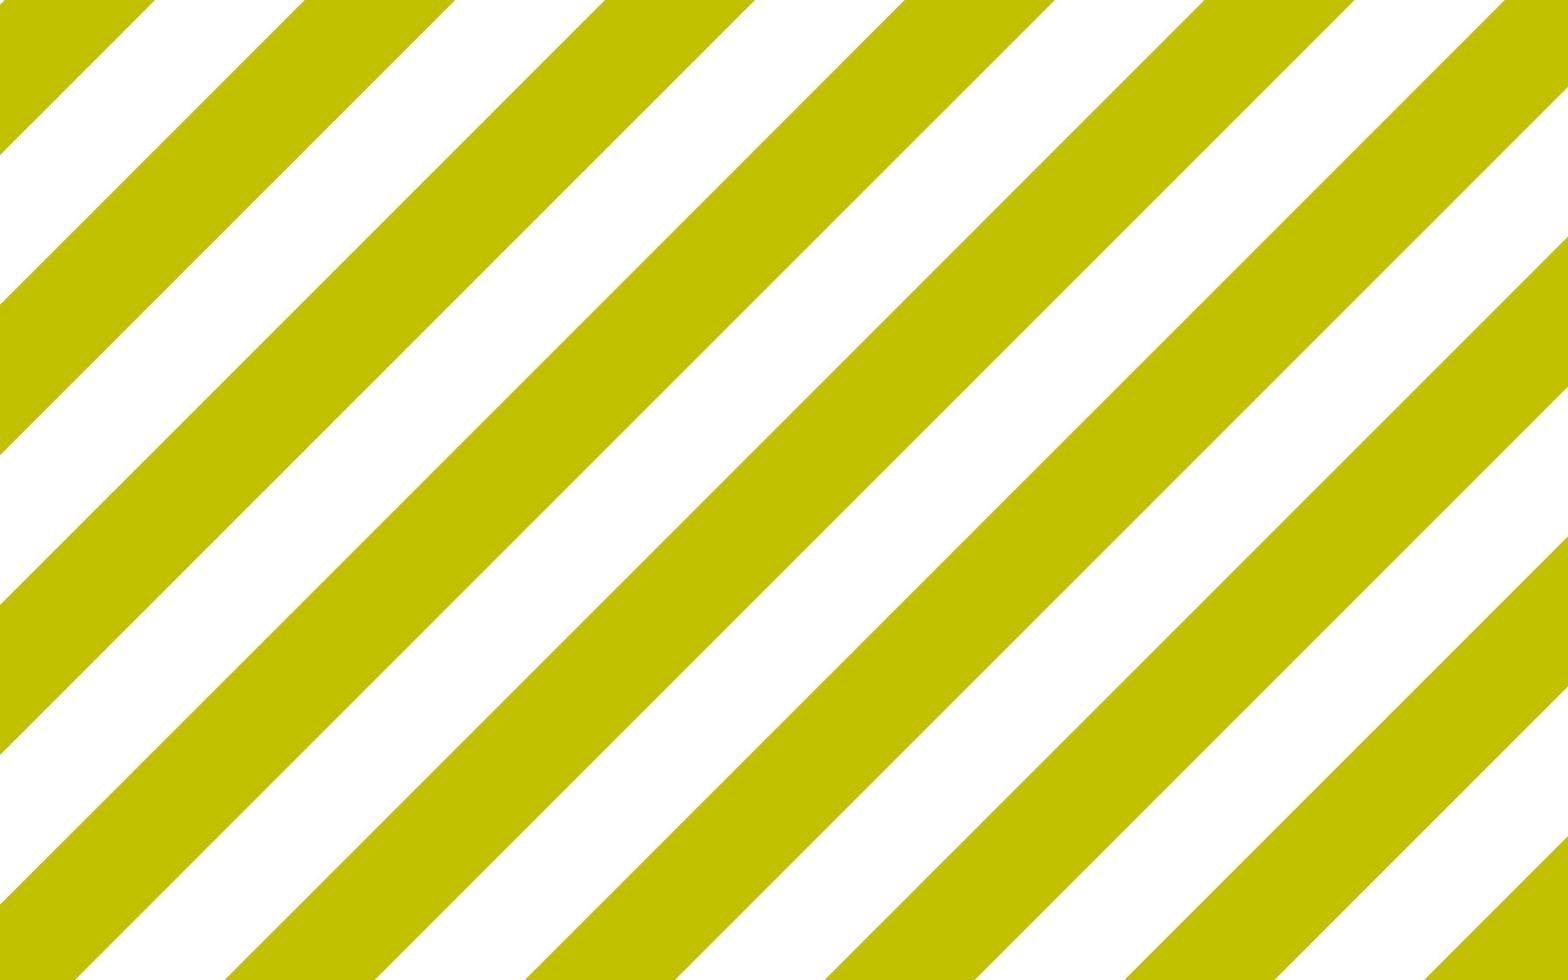 Seamless diagonal lime green and white pattern stripe background. Simple and soft diagonal striped background. Retro and vintage design concept. Suitable for leaflet, brochure, poster, backdrop, etc. photo